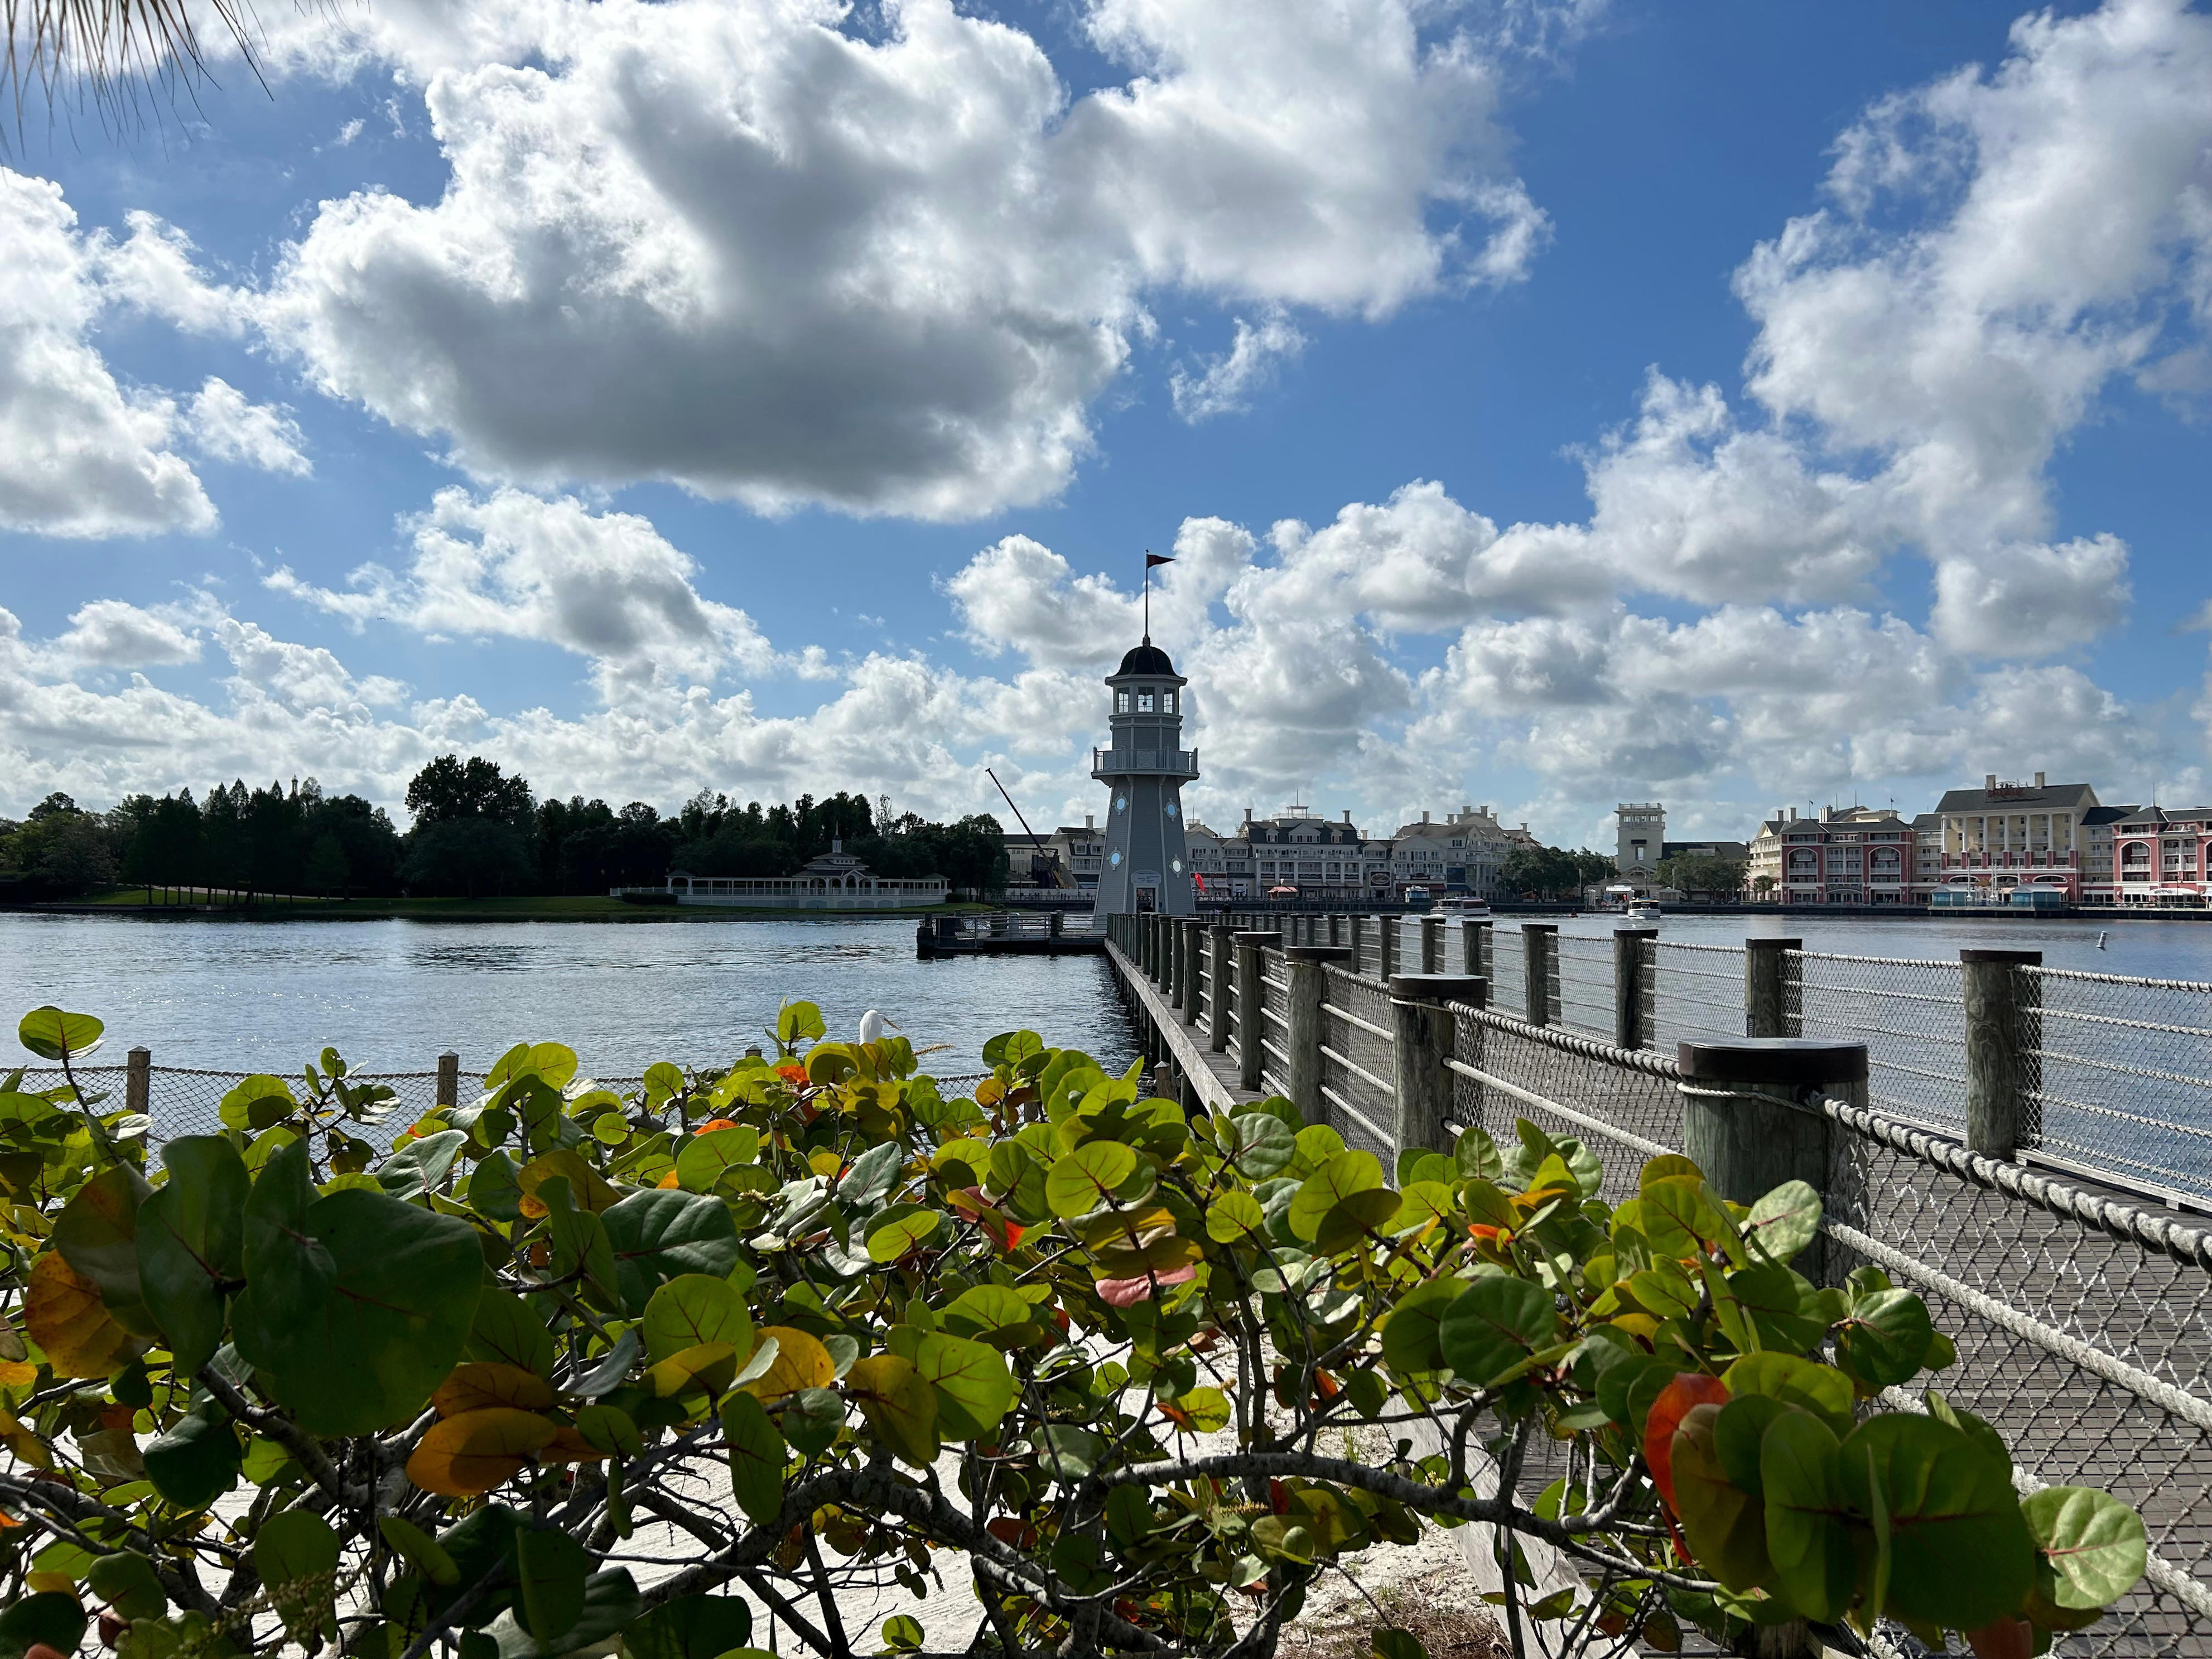 <p>Yacht Club is conveniently located near multiple Disney parks and — in addition to walking — guests have multiple transportation options.</p><p>First off, both Epcot and Hollywood Studios are within walking distance of the resort.</p><p>The resort is also steps away from the Friendship Boats that ferry guests across Crescent Lake between Epcot, Hollywood Studios, and a few other Disney resorts.</p><p>It's also near the Skyliner, which is connected to other resorts and Hollywood Studios. Bus transportation is also available to Magic Kingdom, Animal Kingdom, Hollywood Studios, Disney Springs, Typhoon Lagoon, and <a href="https://www.insider.com/cool-fun-facts-and-secrets-about-disney-world-water-parks">Blizzard Beach</a>.</p>